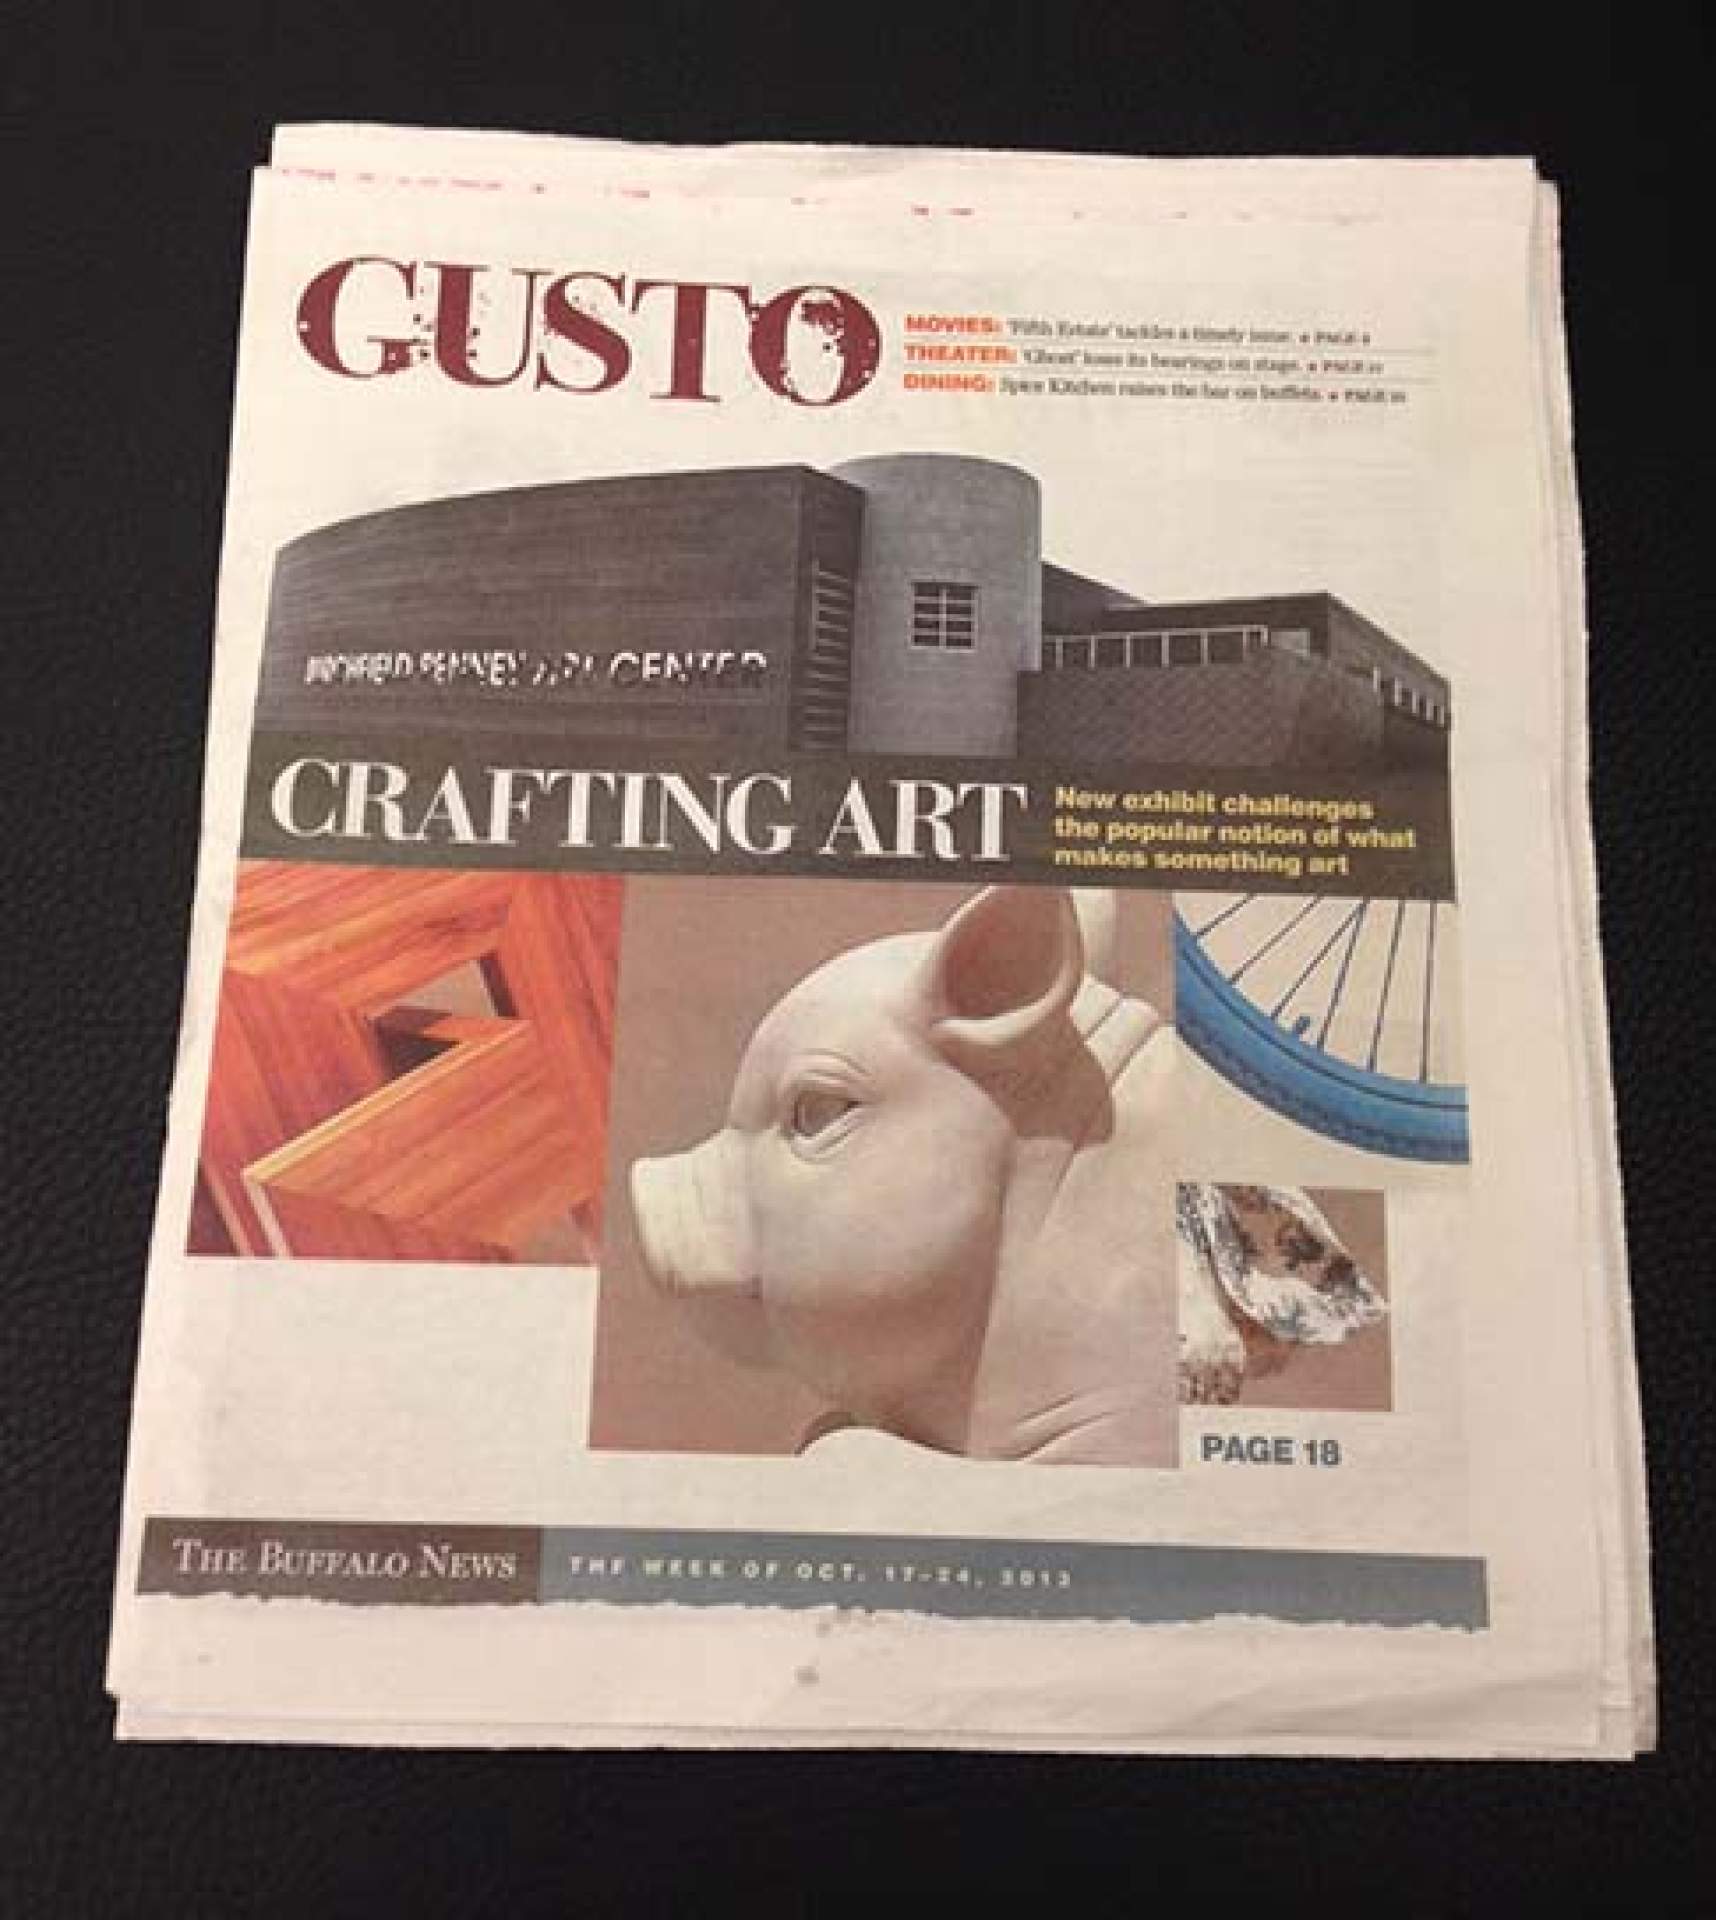 <em>Art in Craft Media 2013</em> is on the cover of Gusto